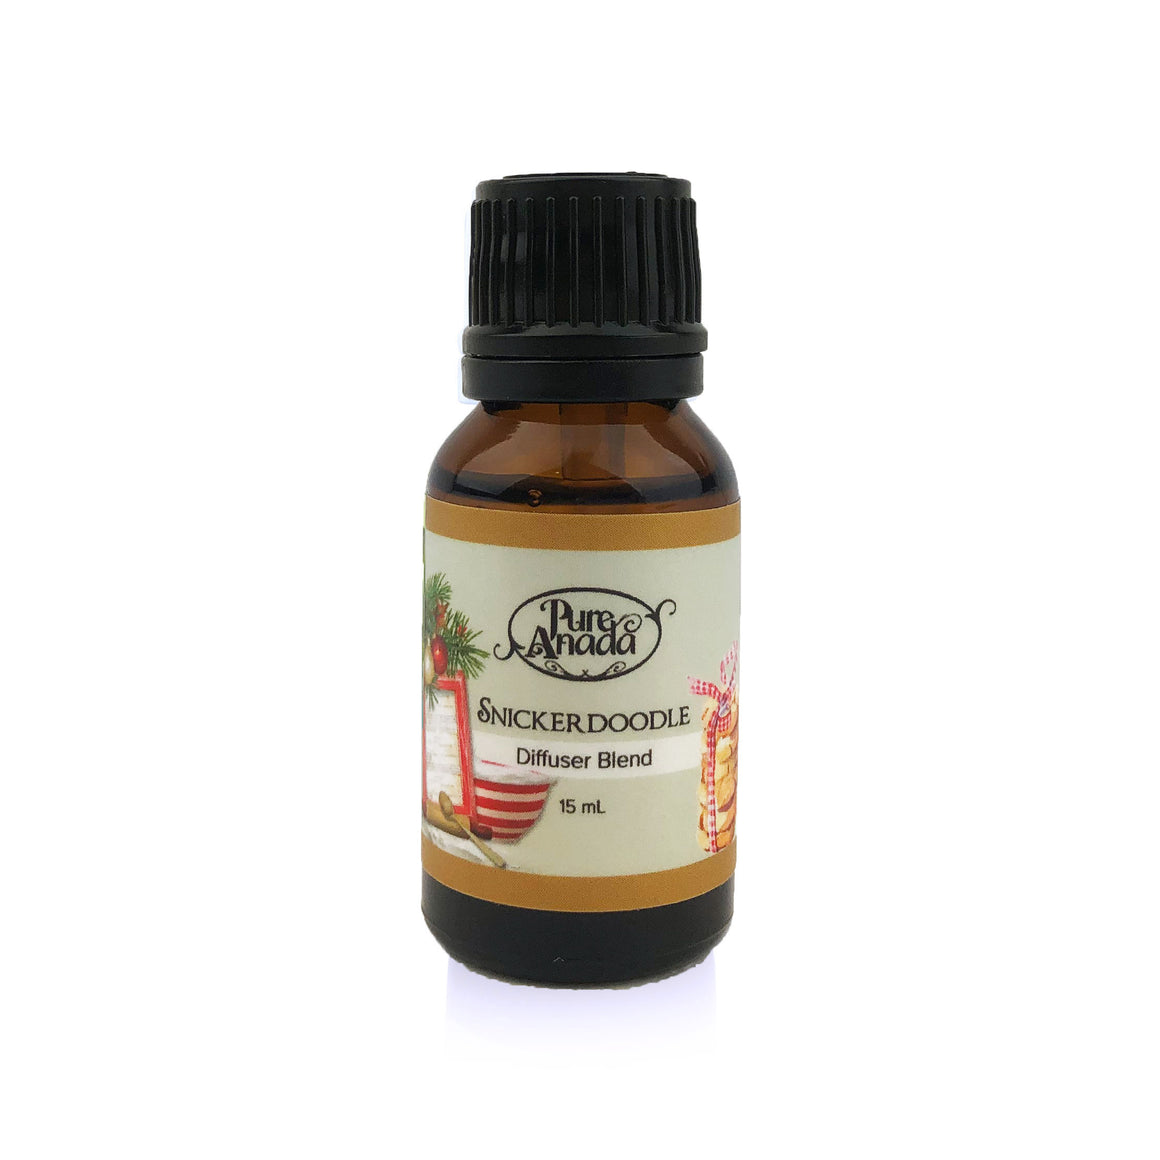 Christmas Essential Oil - SNICKERDOODLE - Diffuser Blend 15ML-PureAnada-Live in the Light